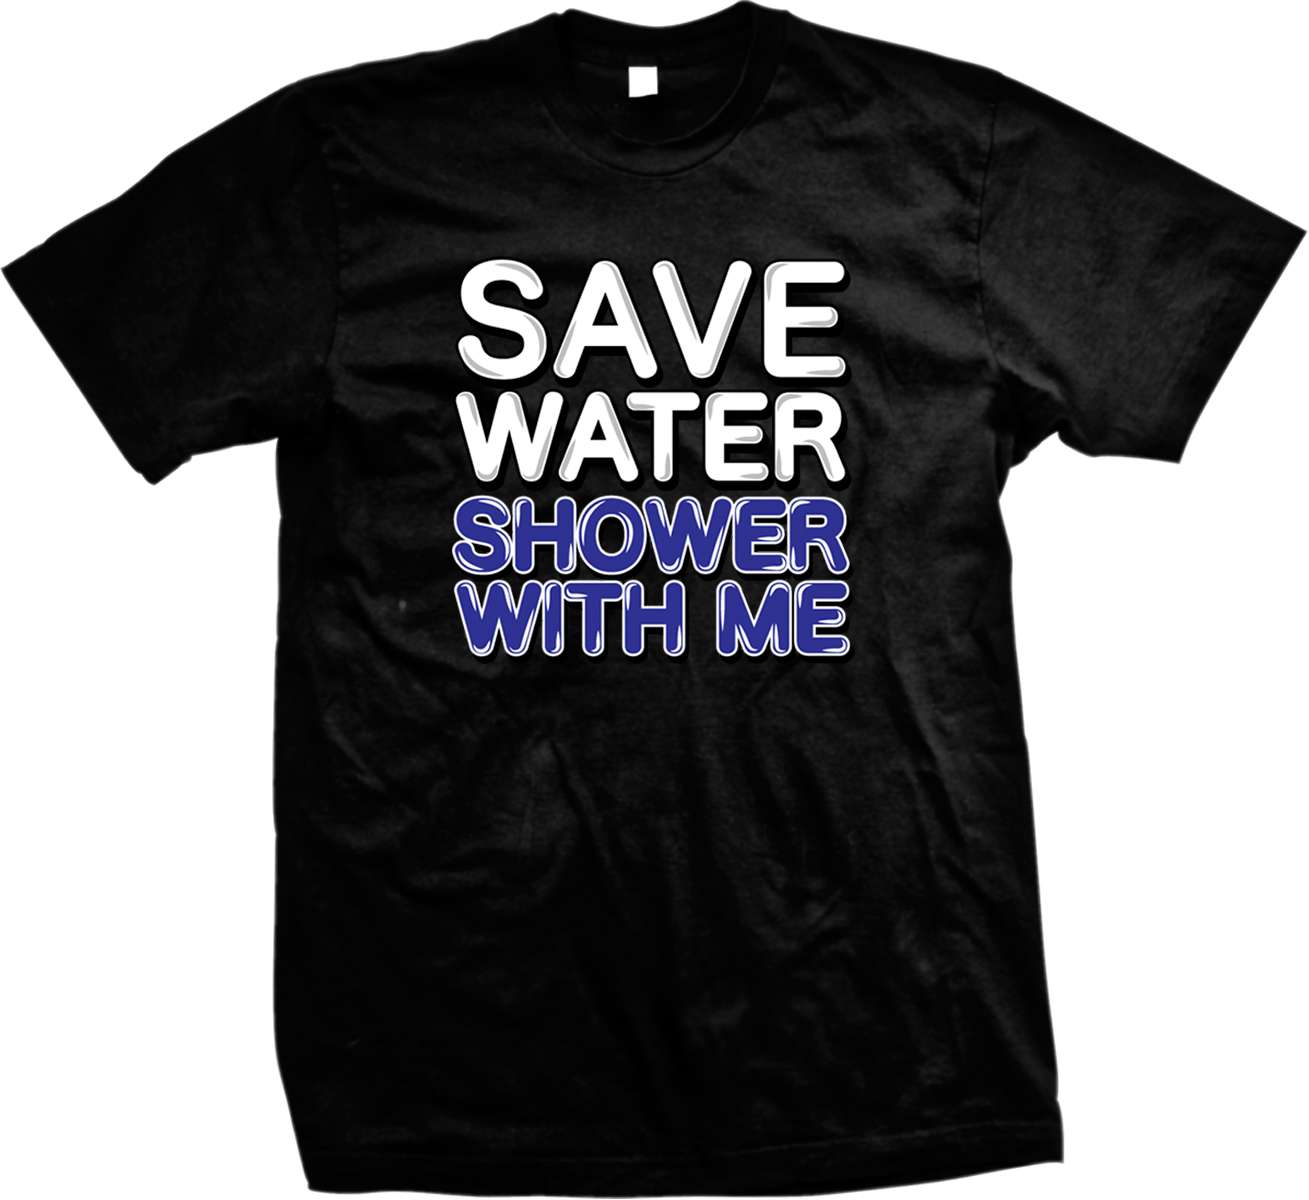 Save Water Shower with Me - Adult Humor Funny Sayings Mens T-shirt | eBay